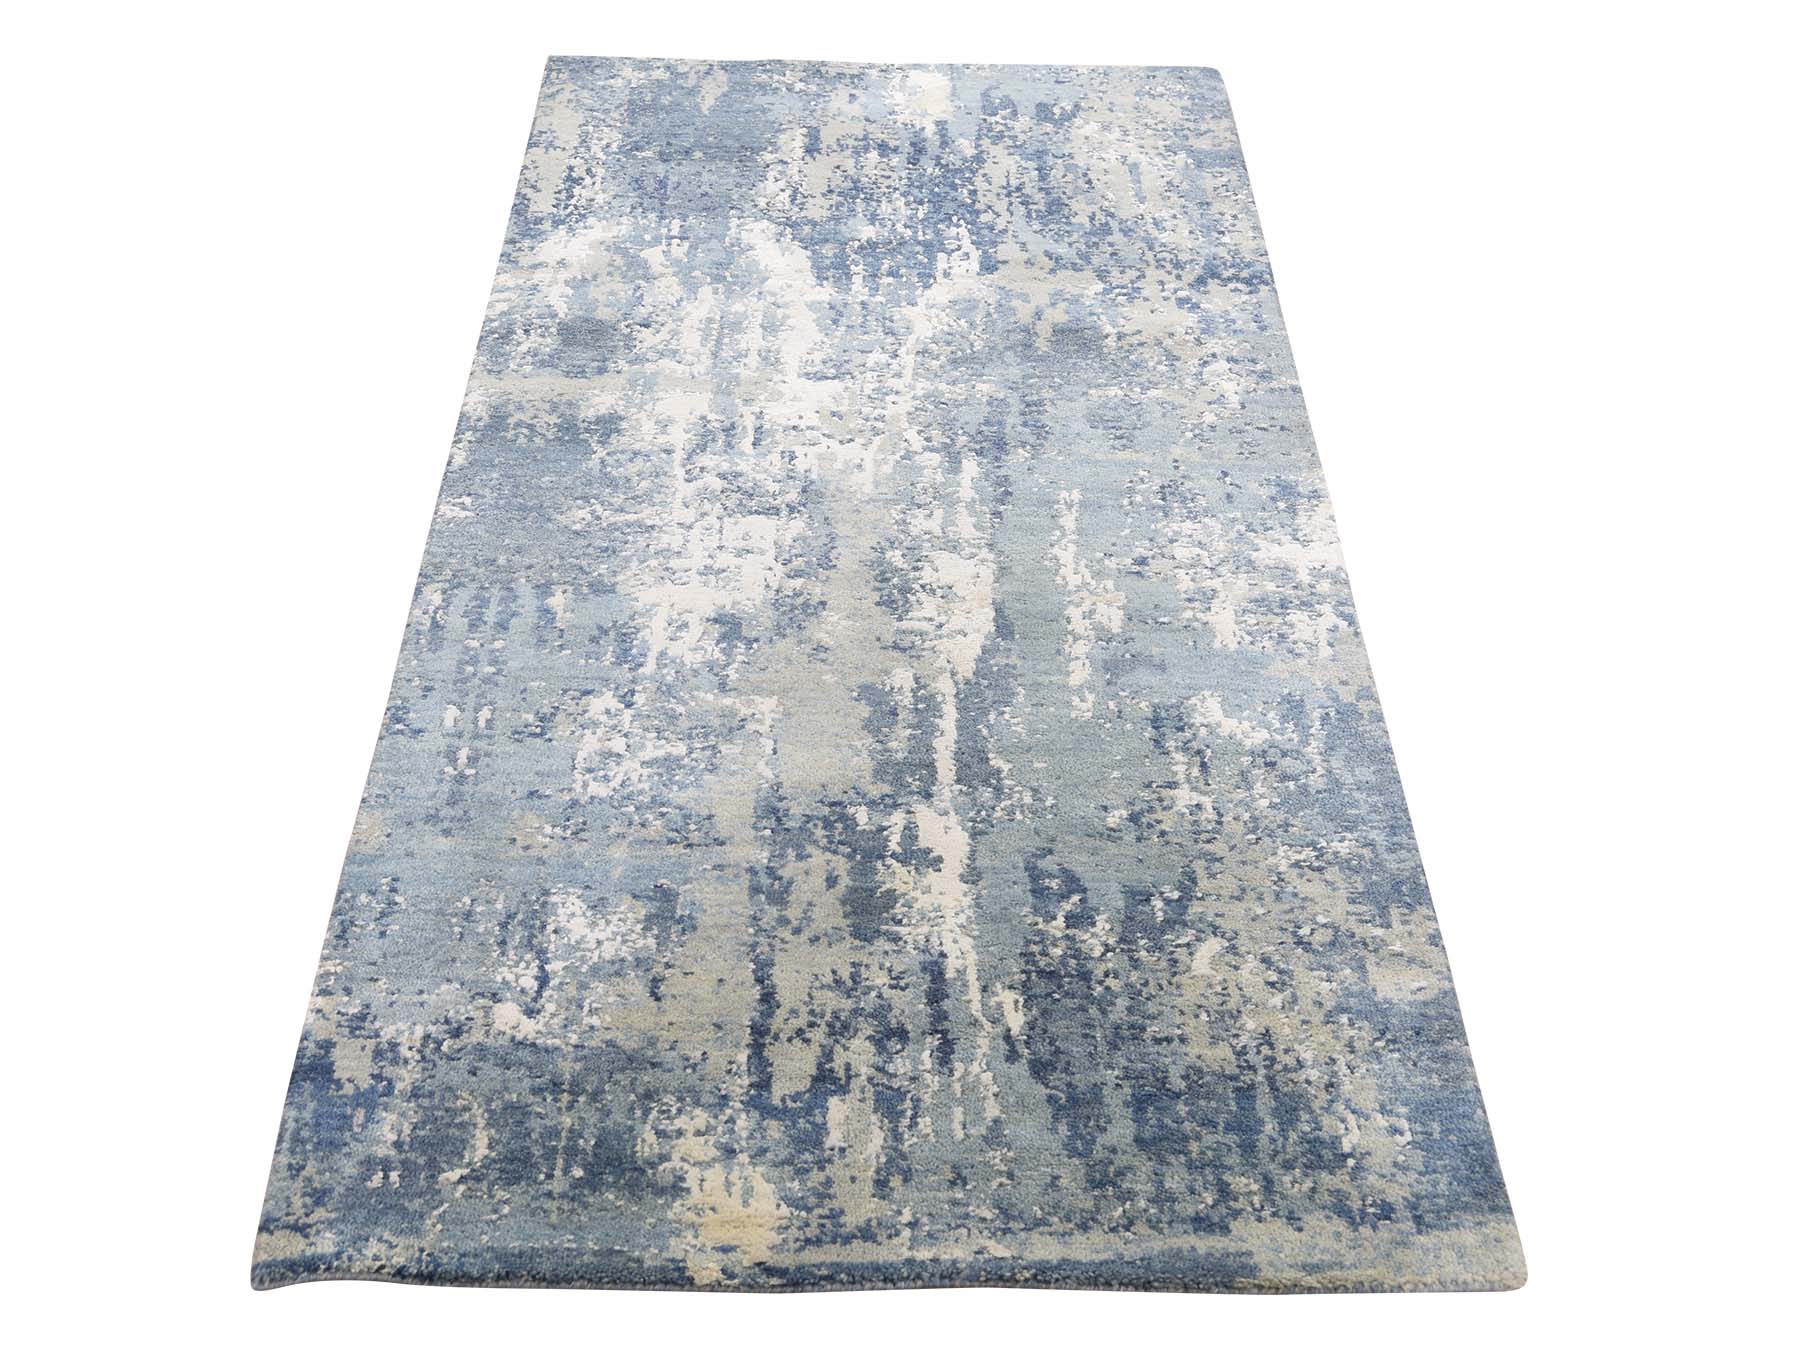 2'7"X6'1" Blue-Gray Abstract Design Wool And Pure Silk Hand-Knotted Oriental Runner Rug moade866